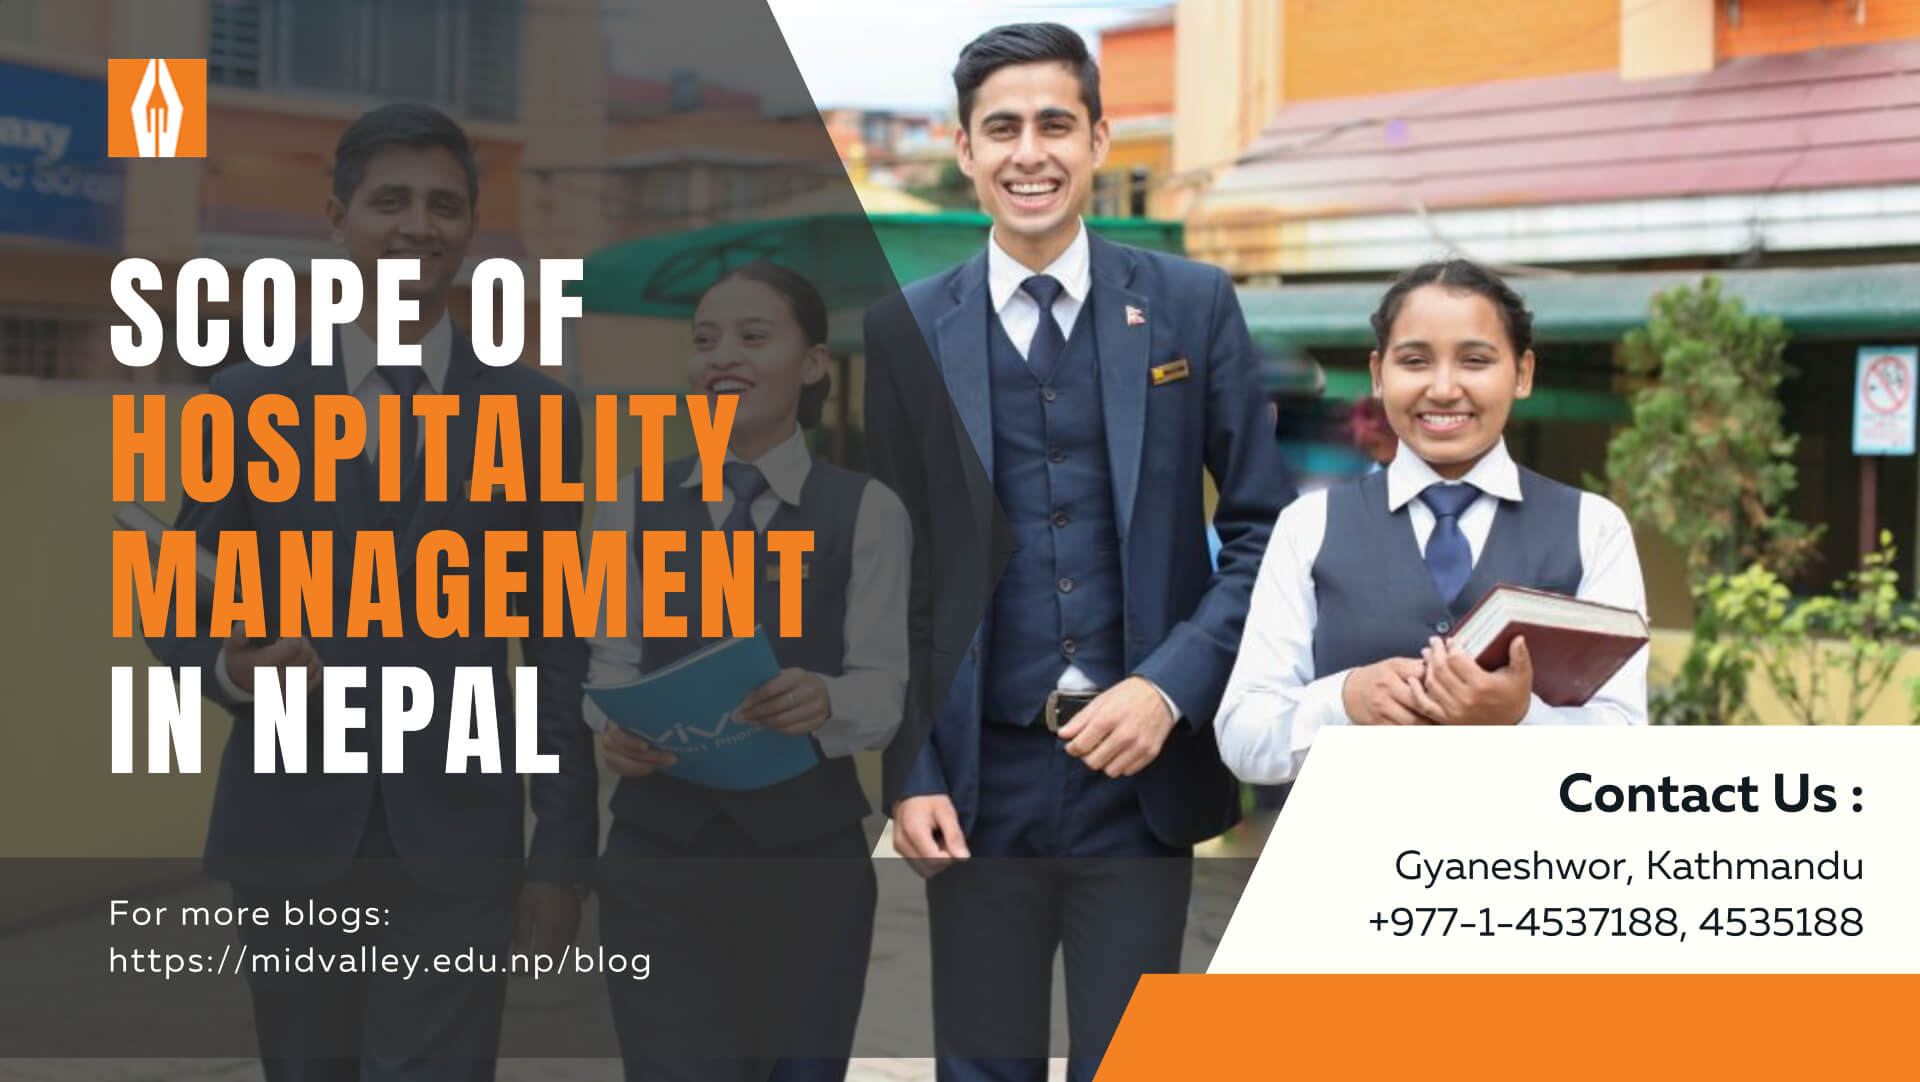 Scope of Hospitality Management in Nepal